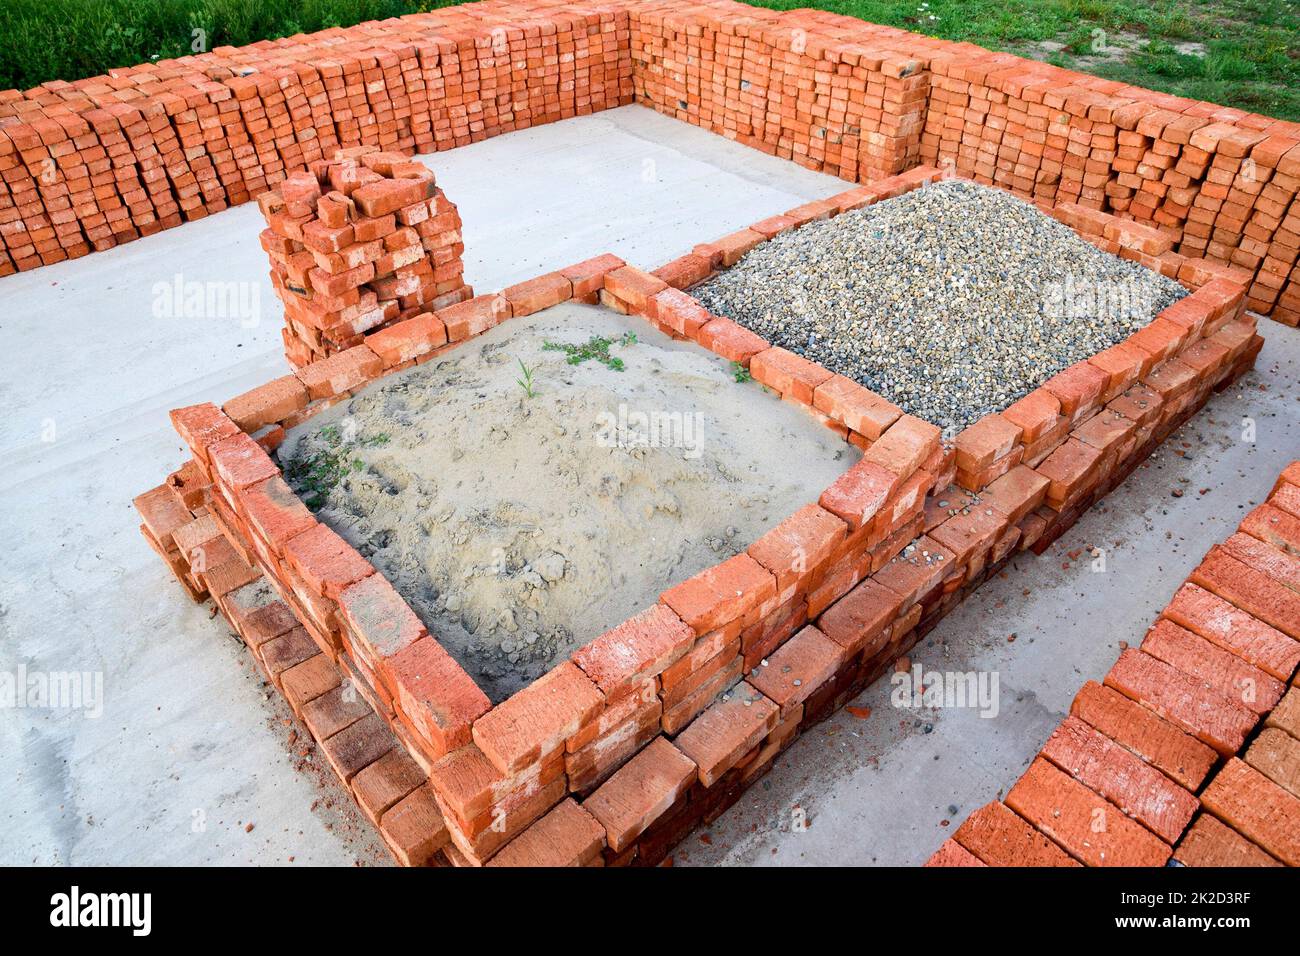 The red brick folded neatly on the foundation of the house. Home construction Stock Photo